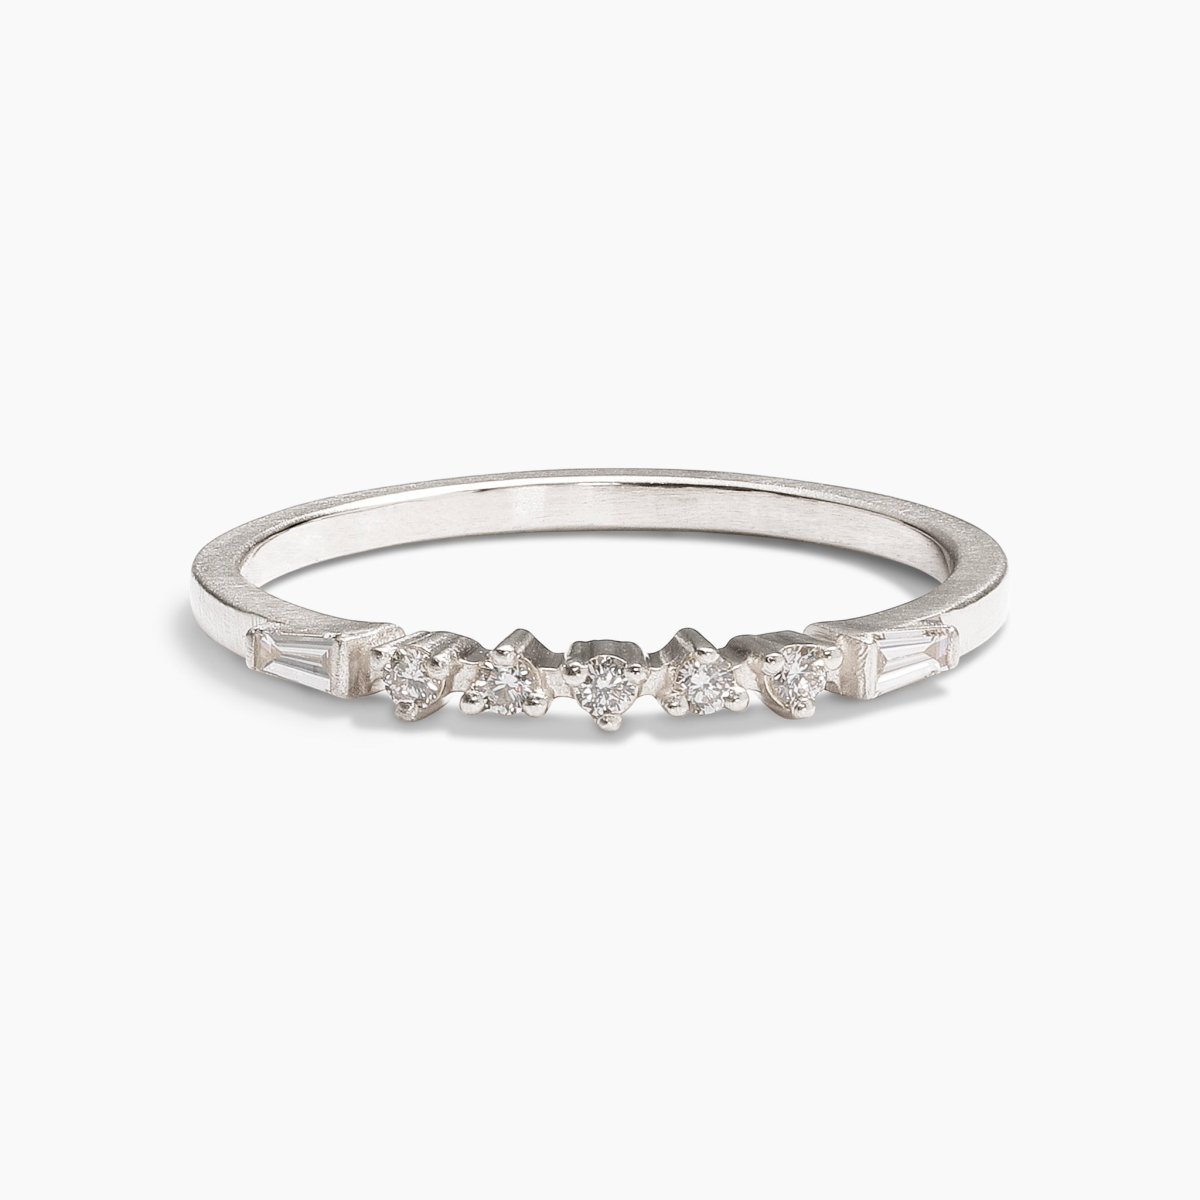 Alma 14K recycled white gold stacking ring, with lab-grown diamonds. Designed and handcrafted in Portland, Oregon.